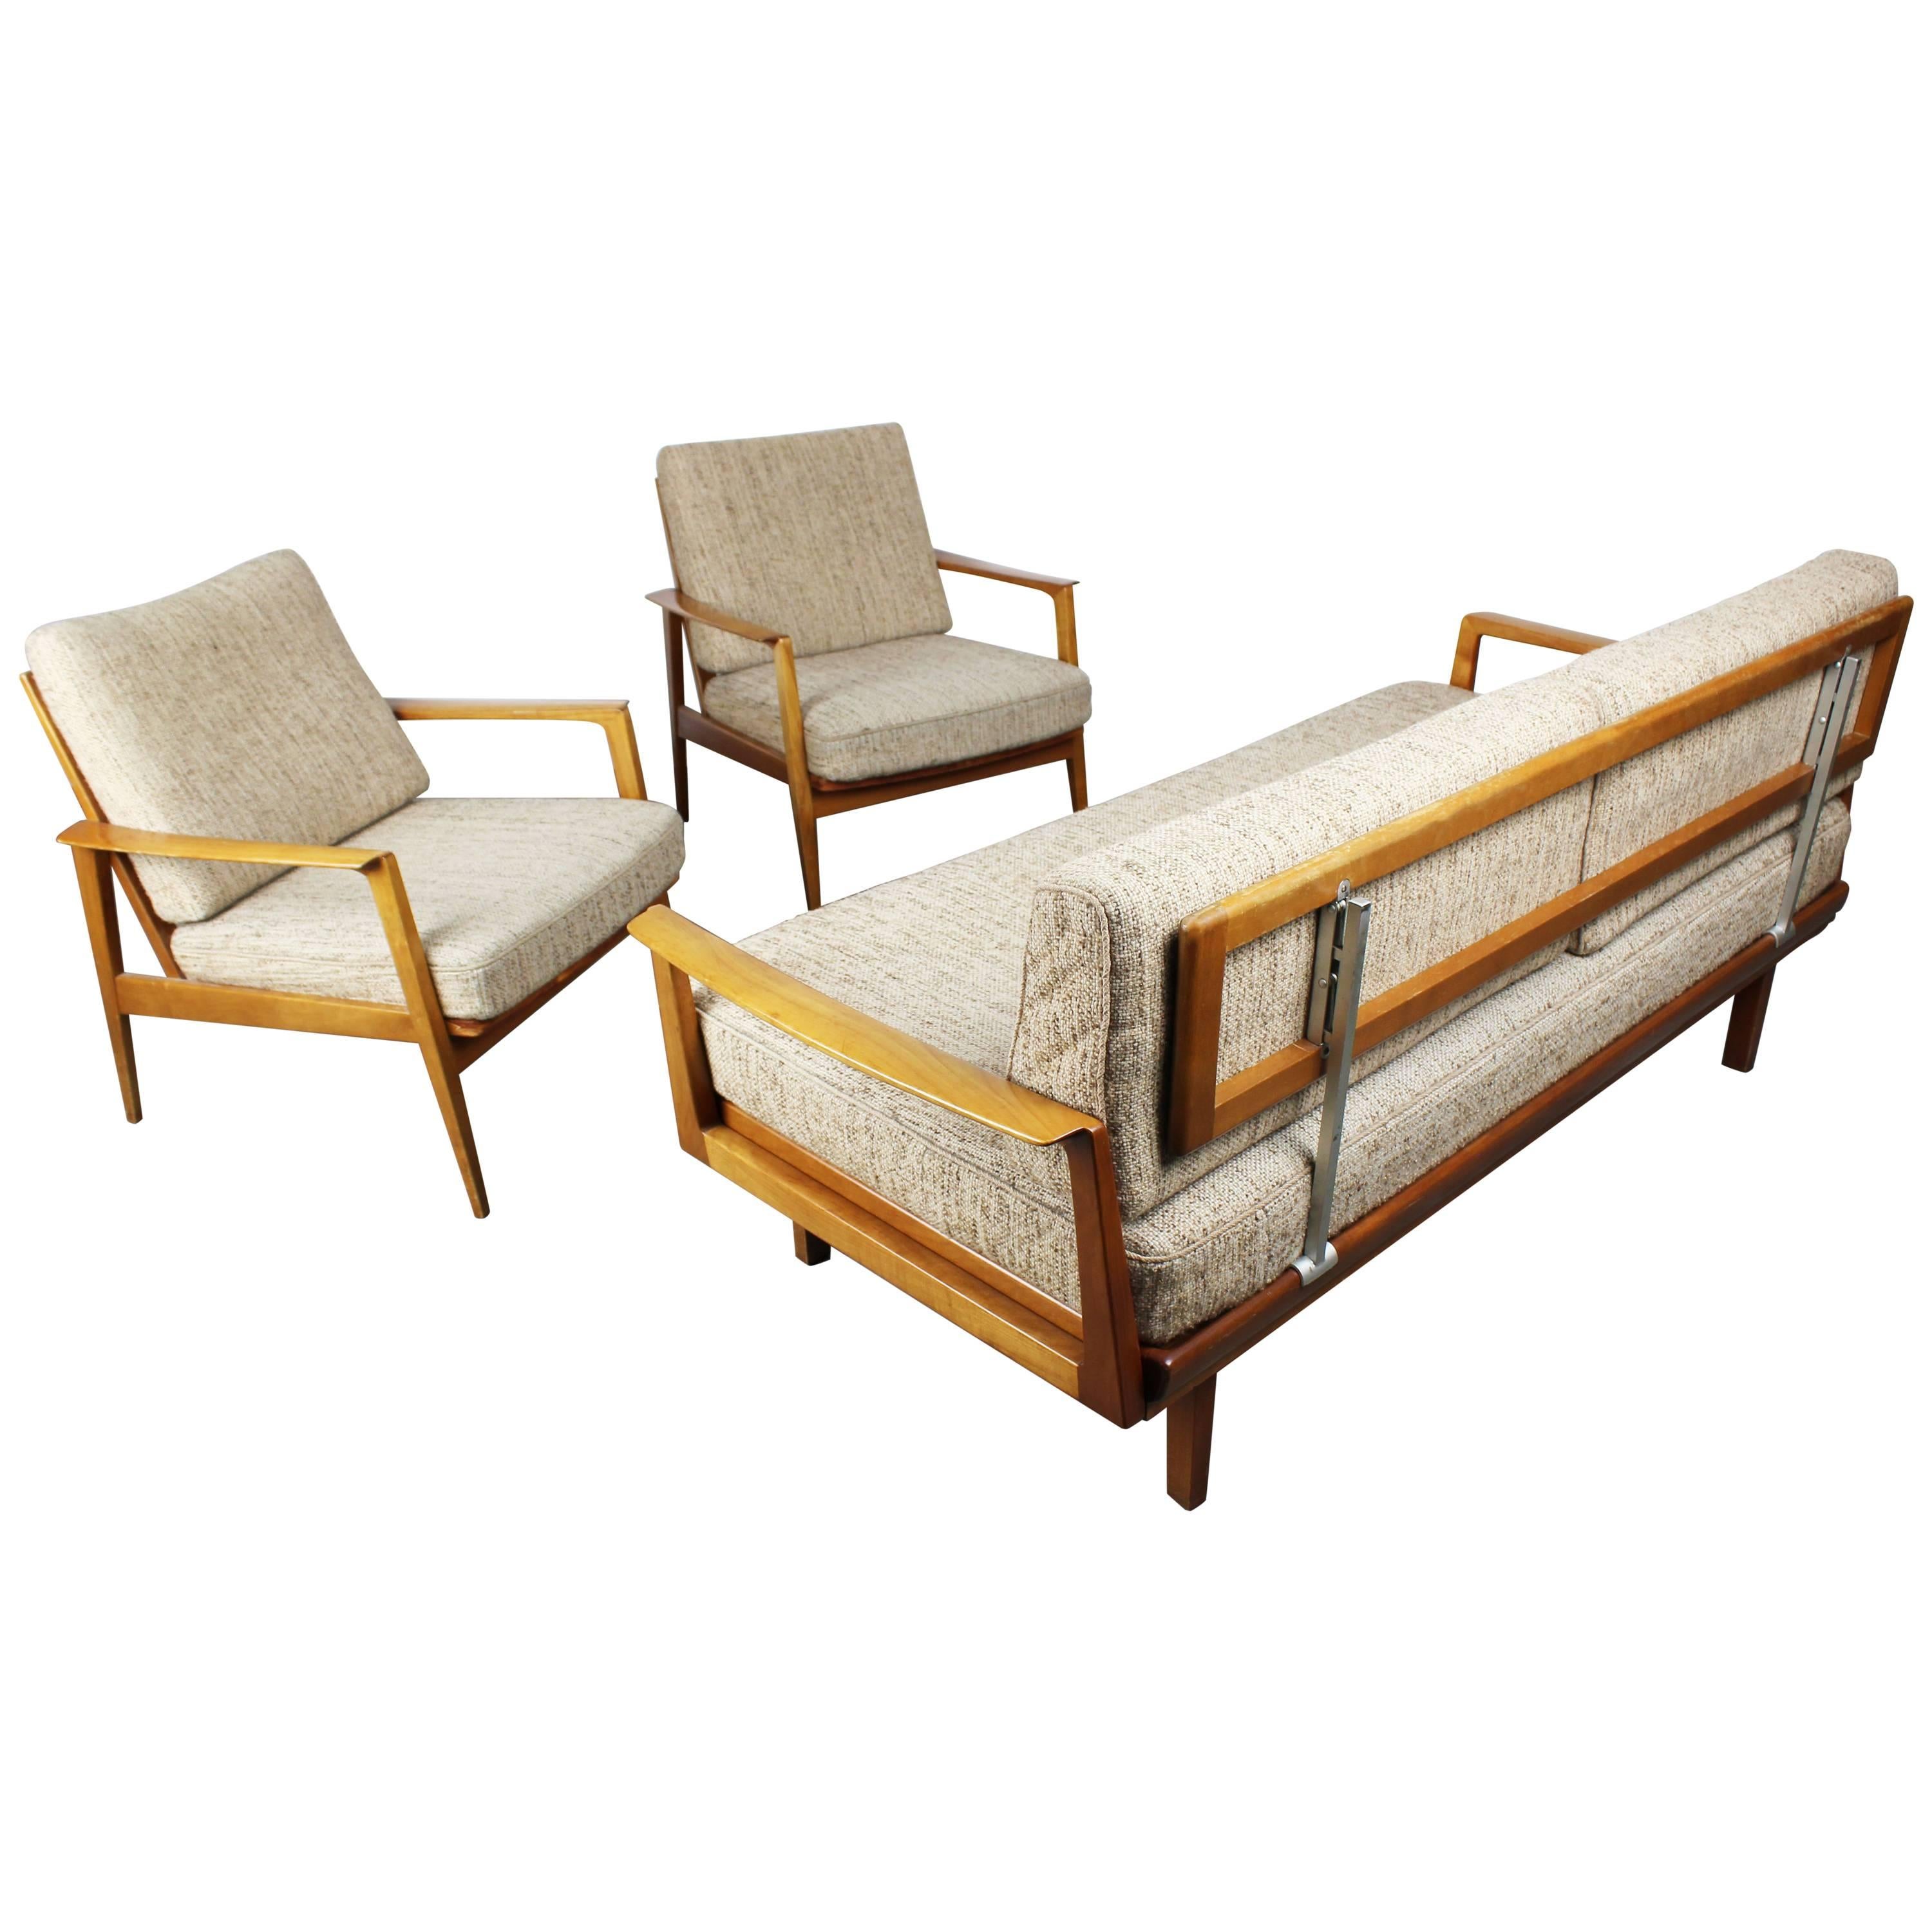 Full Original Knoll Antimott Set 1950 with Easy Chairs and Daybed Beige Brown